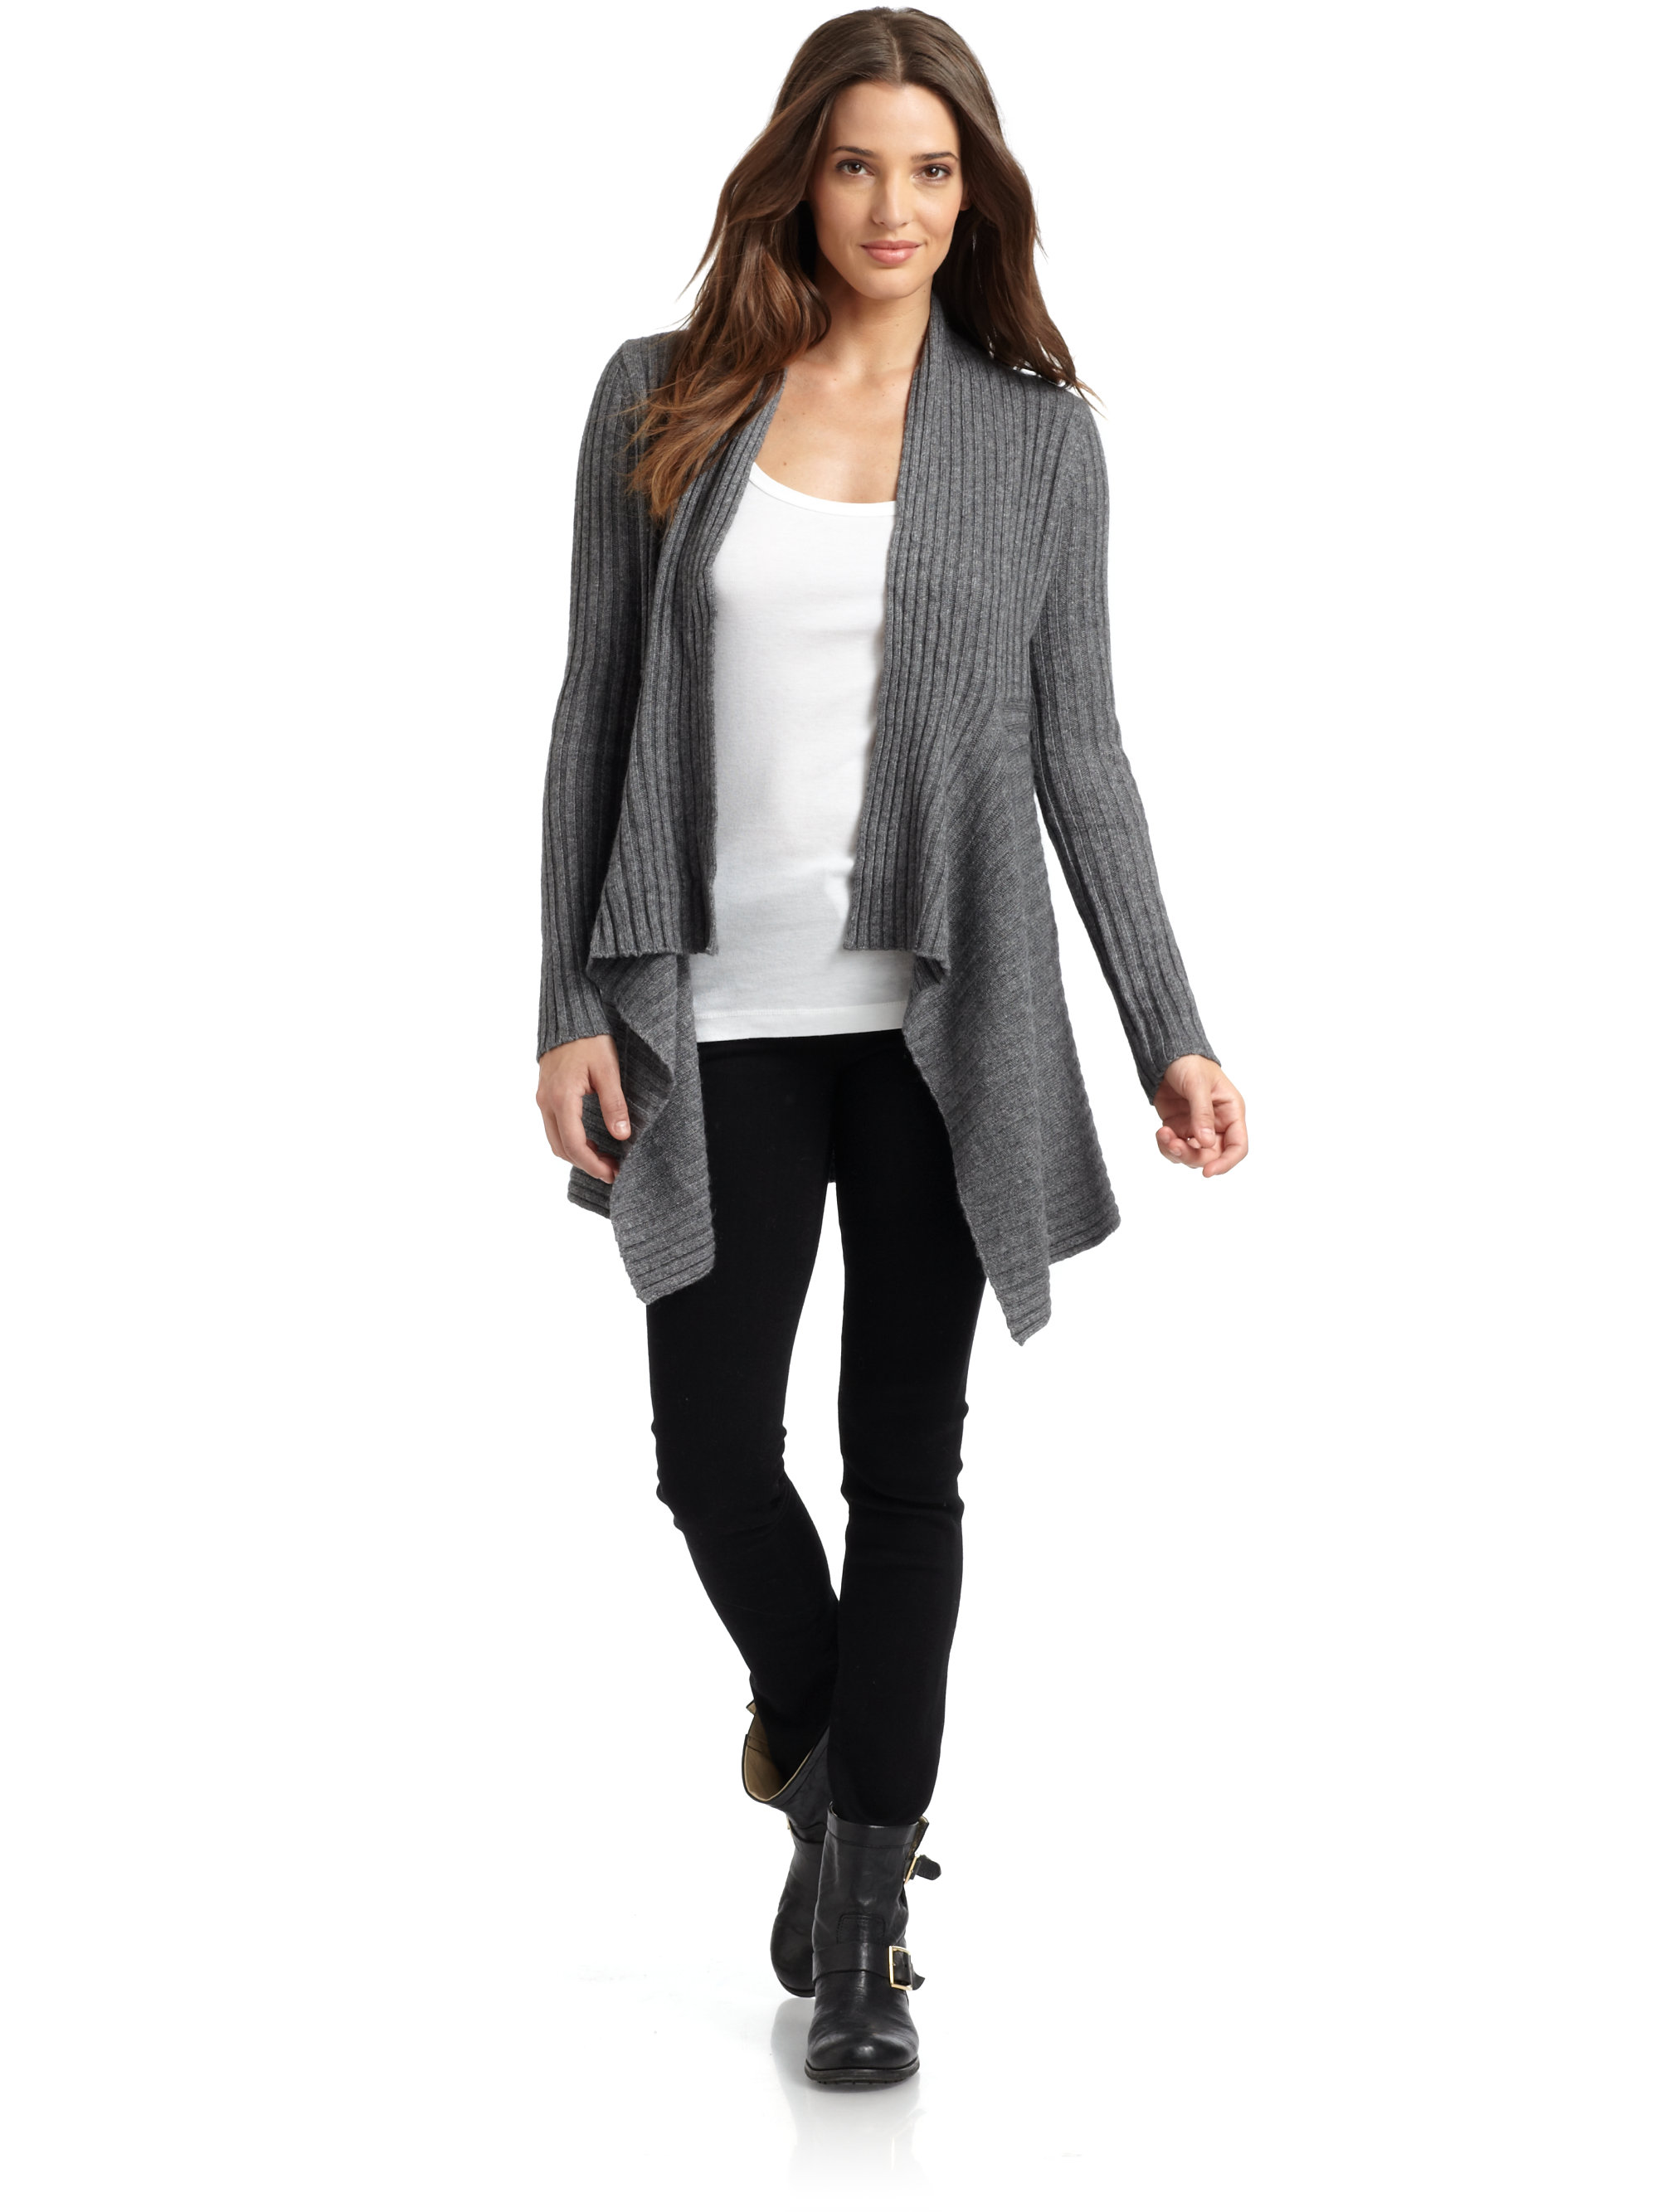 Autumn Cashmere Cashmere Tie Front Rib Cardigan in Gray - Lyst